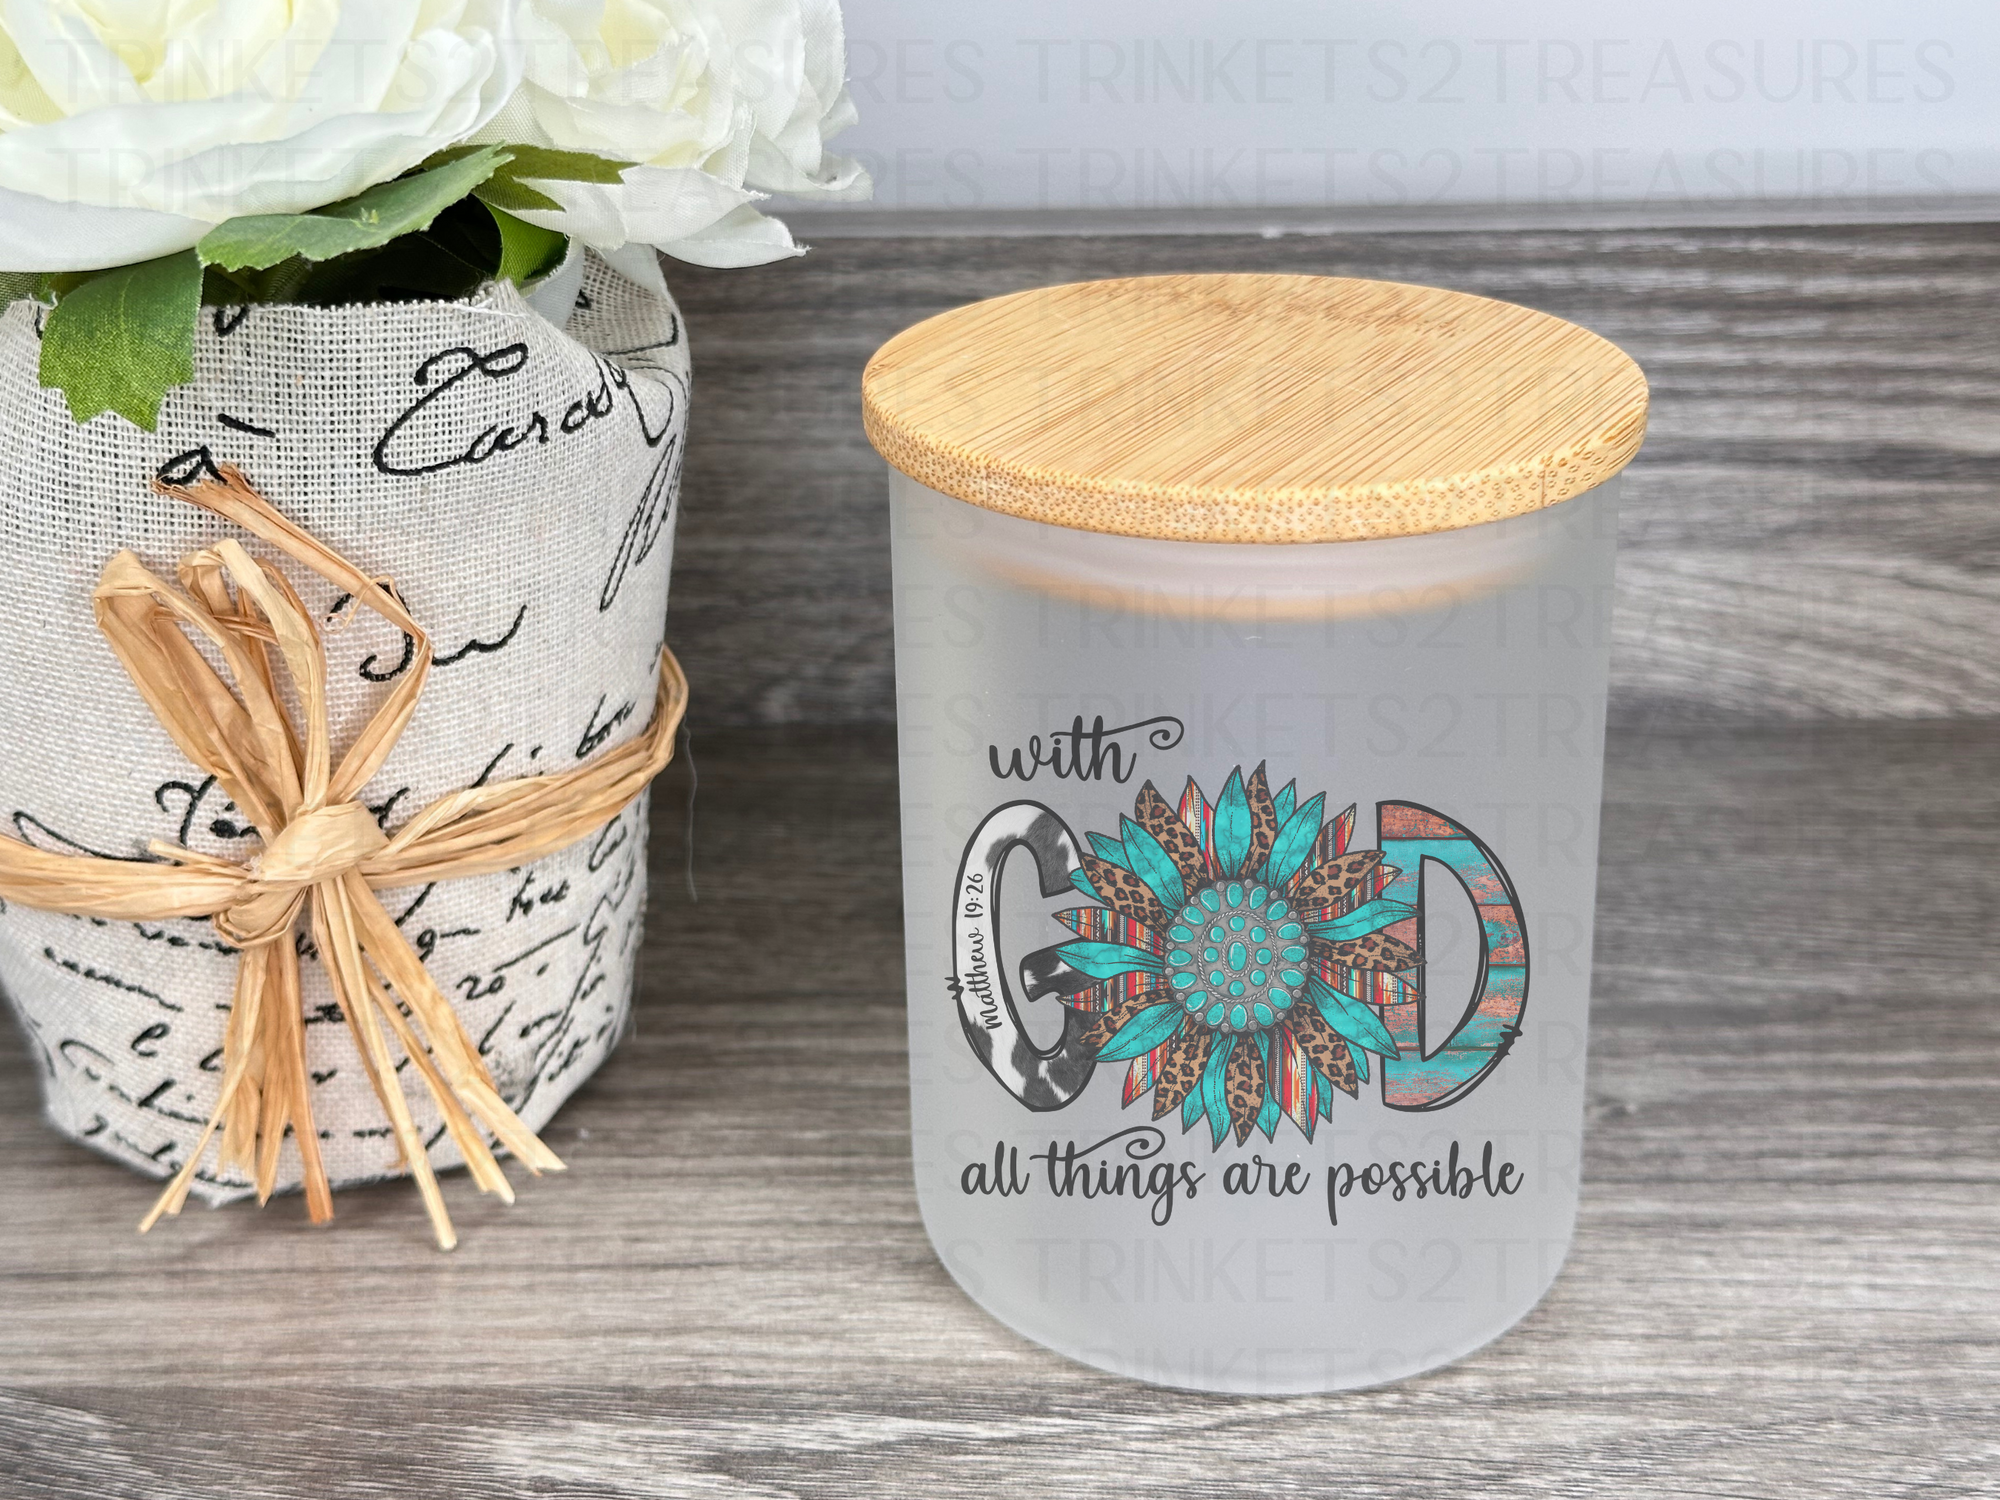 10 oz Frosted Candle Jars with Bamboo Lid/Multi-Purpose Jar/With God All Things are Possible/#502